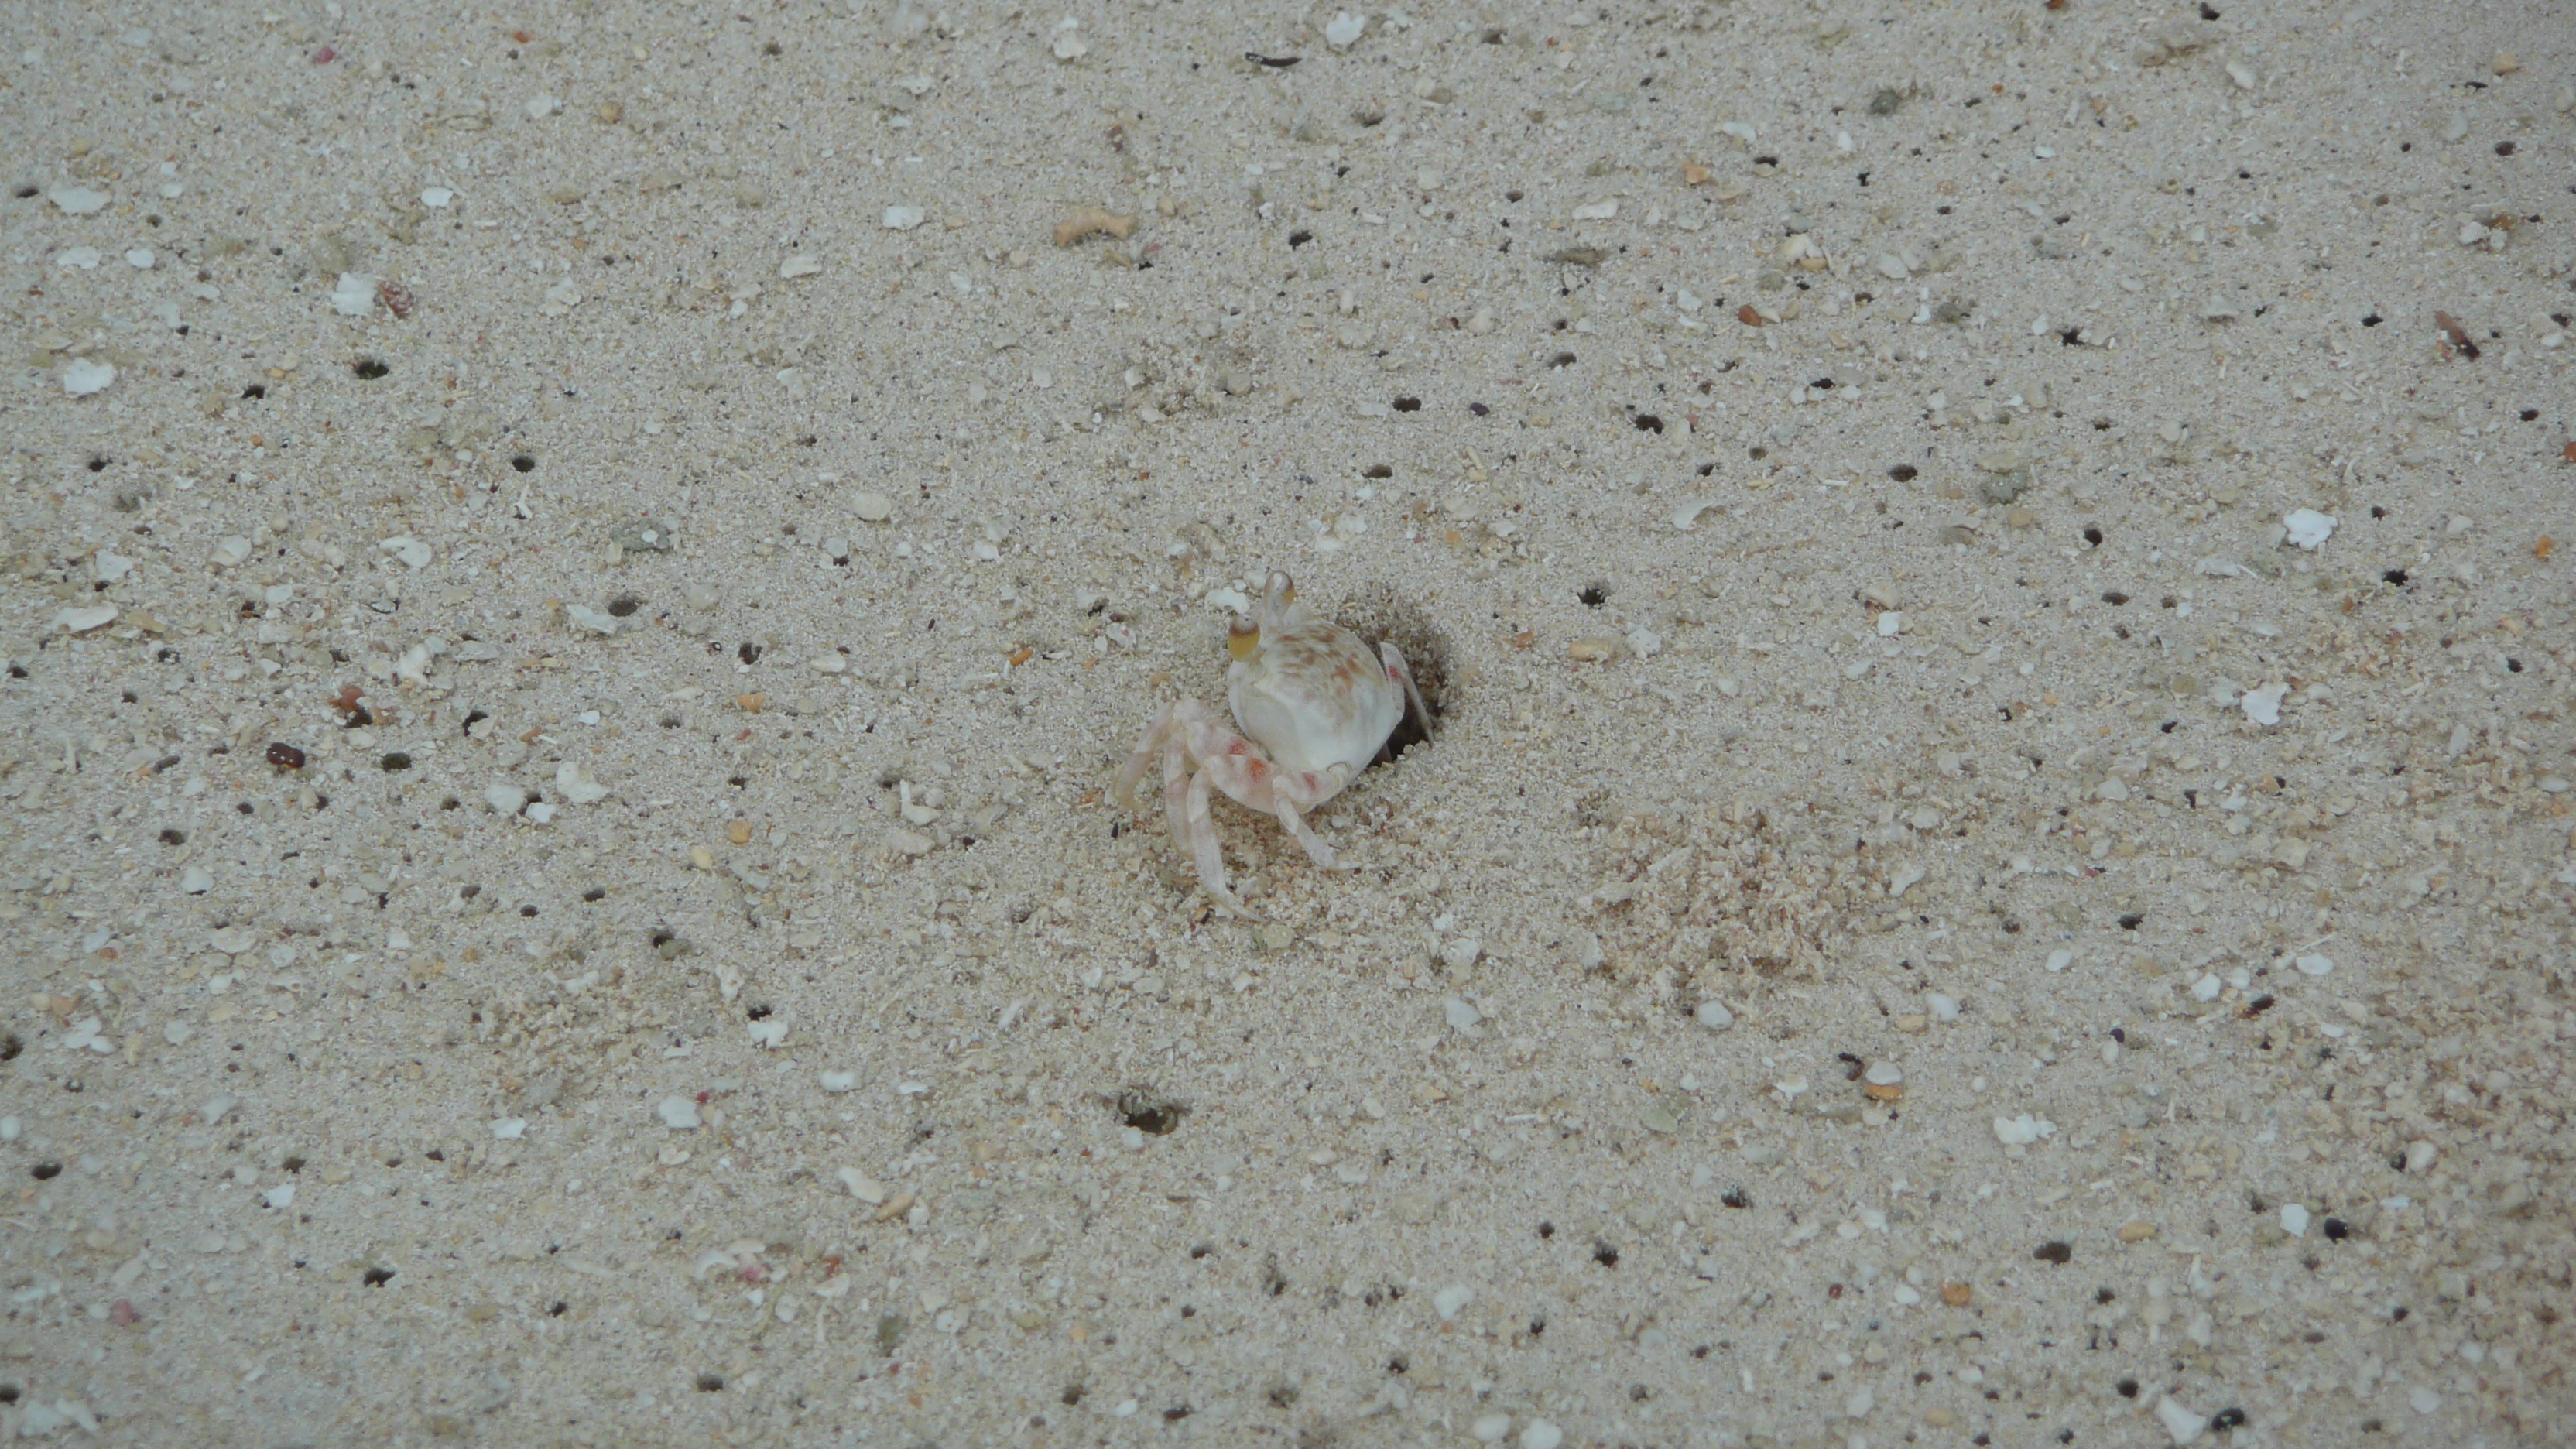 There were also crabs who lived in holes.  At night, with a flashlight, we could see hundreds on the beach.